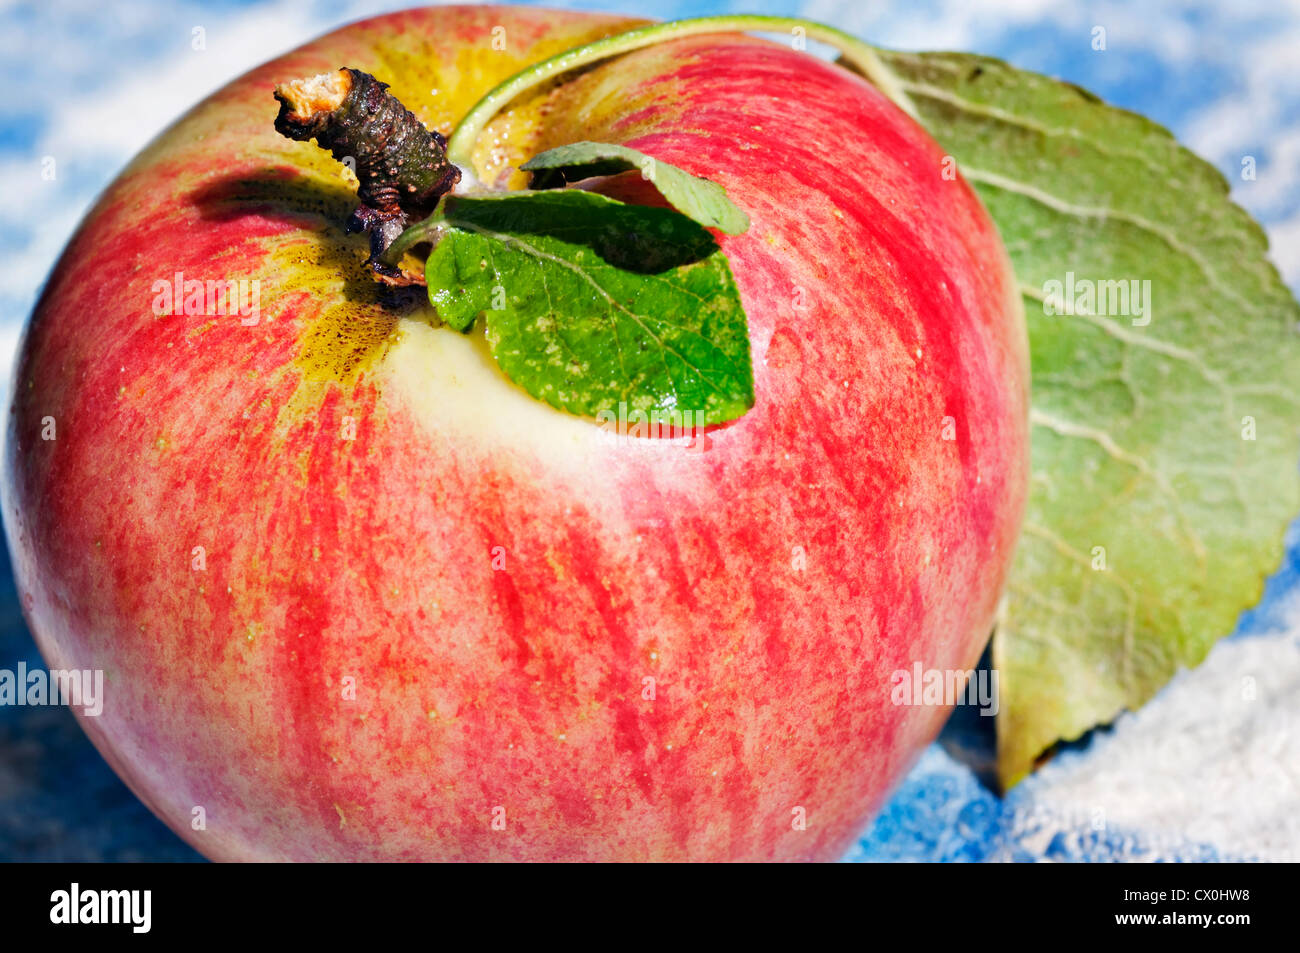 Closeup of a freshly picked apple in the sunshine on a cloth napkin. Stock Photo